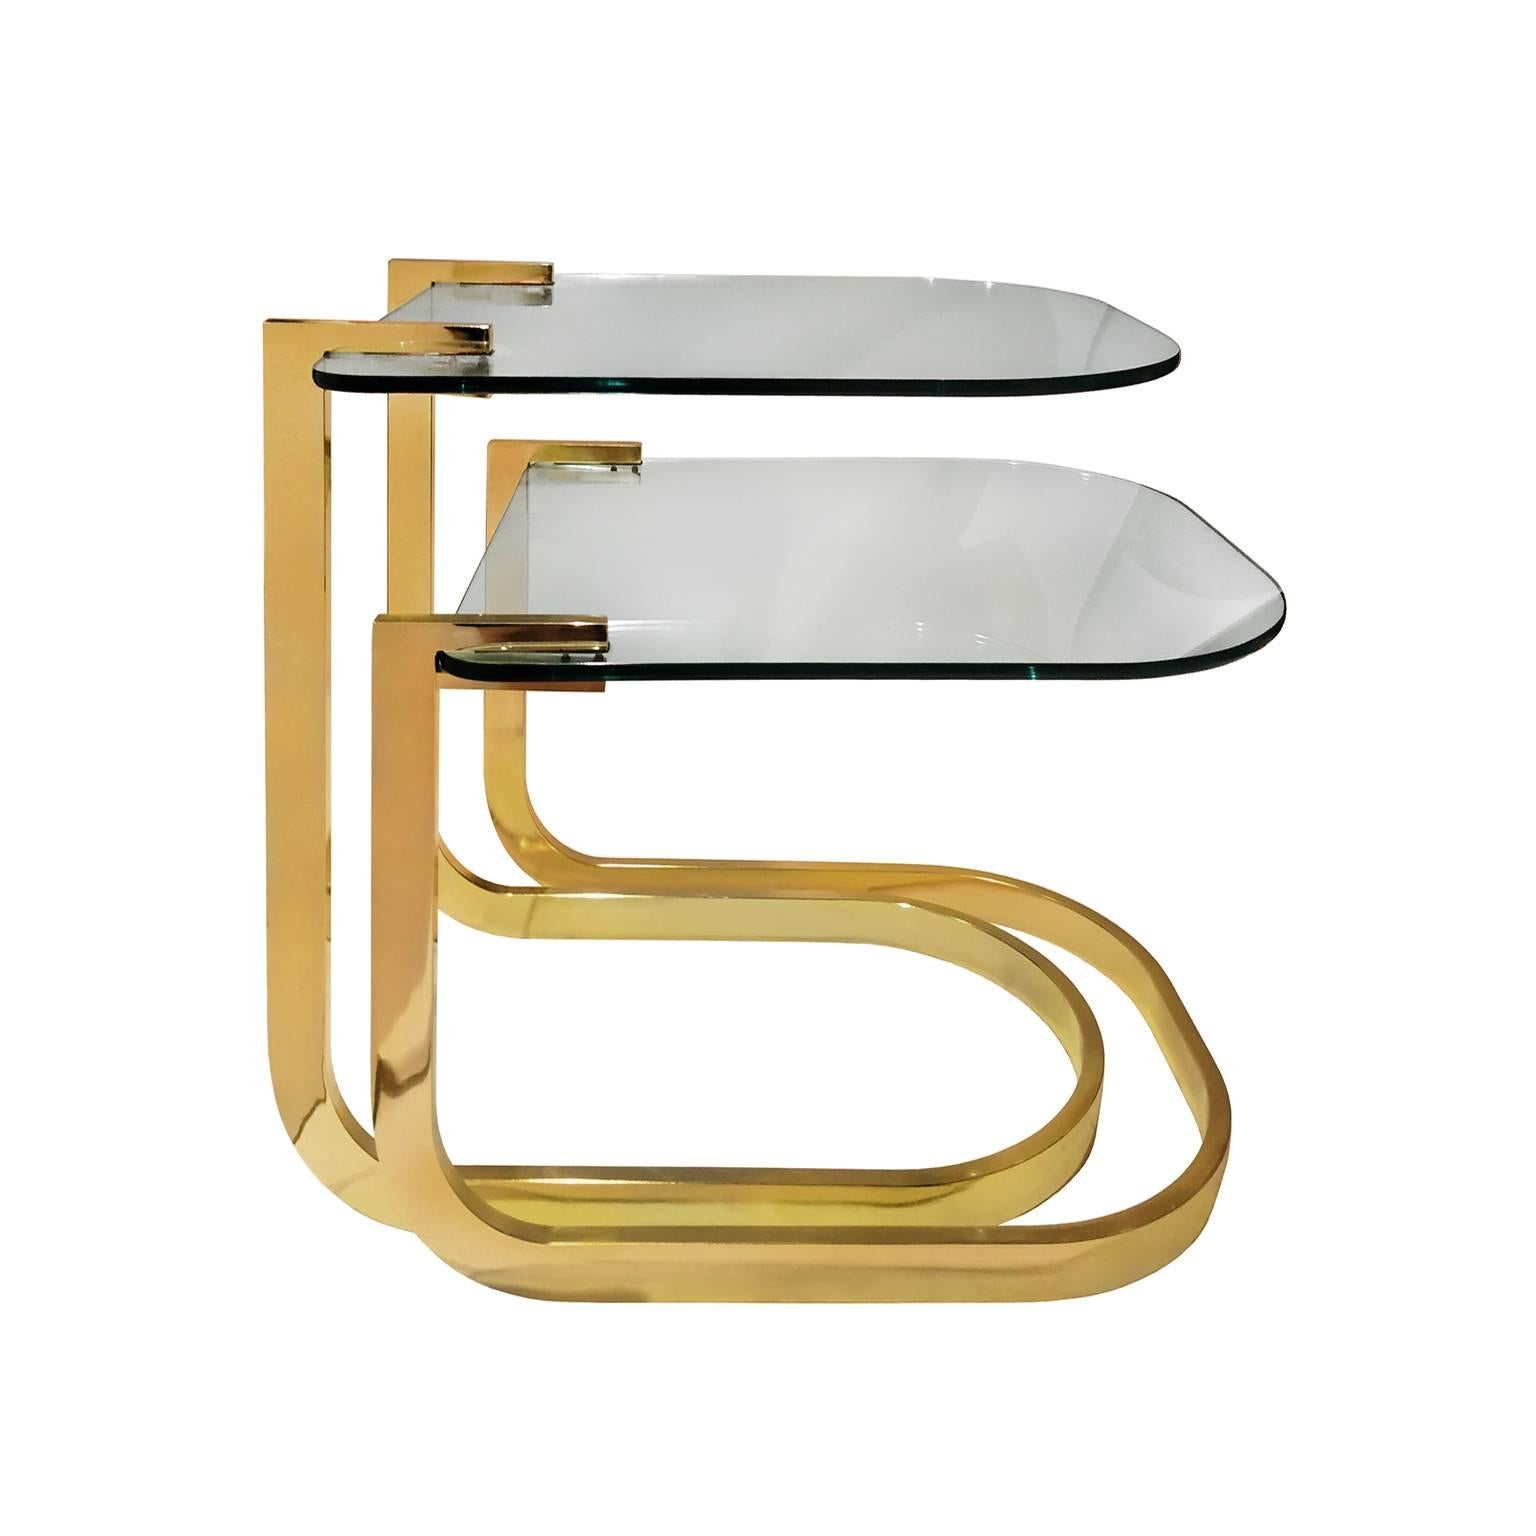 Set of two curved brass and glass nesting side tables, USA, 1970s.